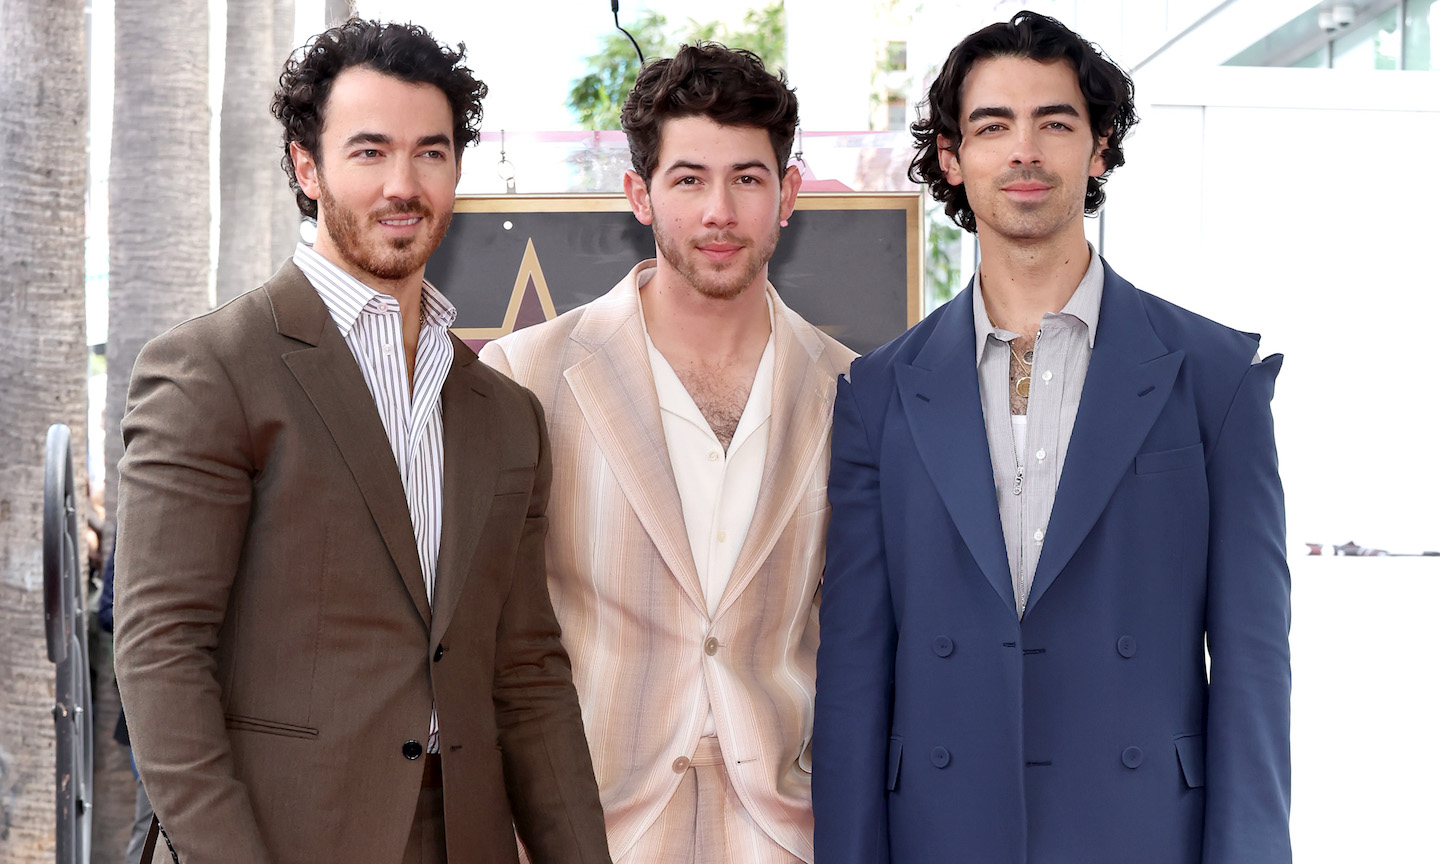 The Jonas Brothers Announce New Album At Hollywood Walk Of Fame